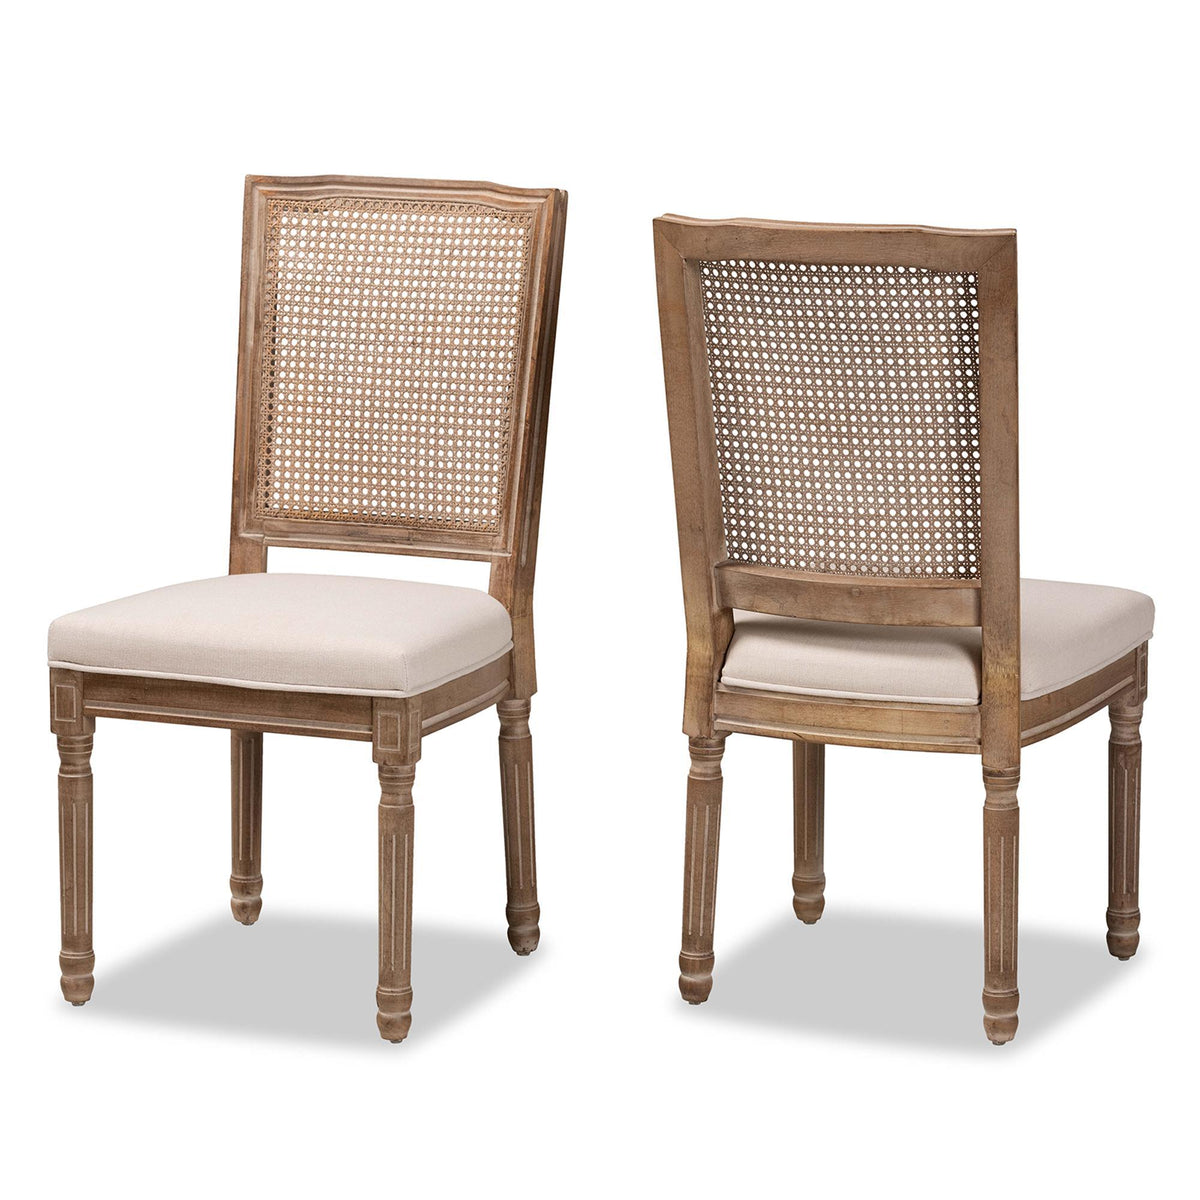 Baxton Studio Louane Traditional French Inspired Beige Fabric Upholstered And Antique Brown Finished Wood 2-Piece Dining Chair Set With Rattan - W-LOUIS-R-06-Antique/Rattan-Chair